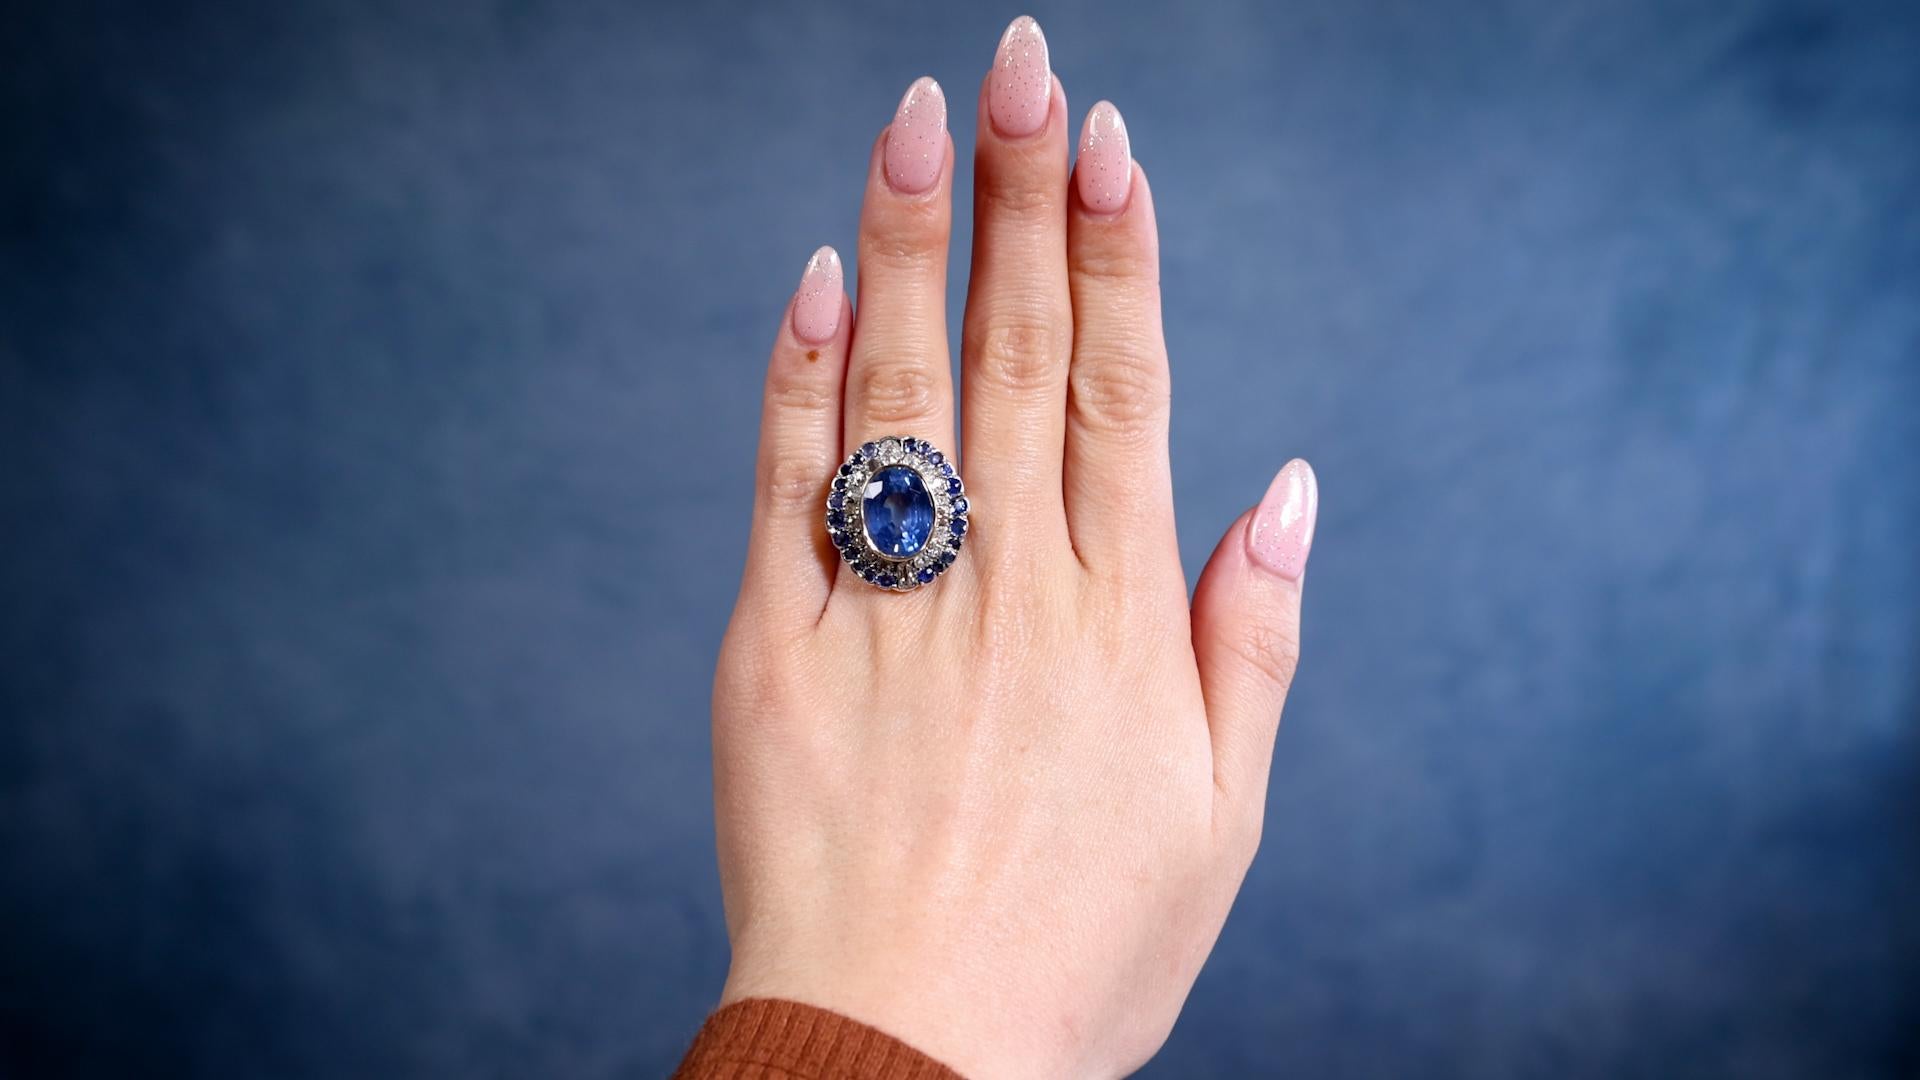 One Late Victorian 10.07 Carat Sapphire and Diamond Silver 10k White Gold Cluster Ring. Featuring one oval mixed cut sapphire weighing 10.07 carats. Accented by 18 mixed cut diamonds with a total weight of approximately 0.70 carats, graded